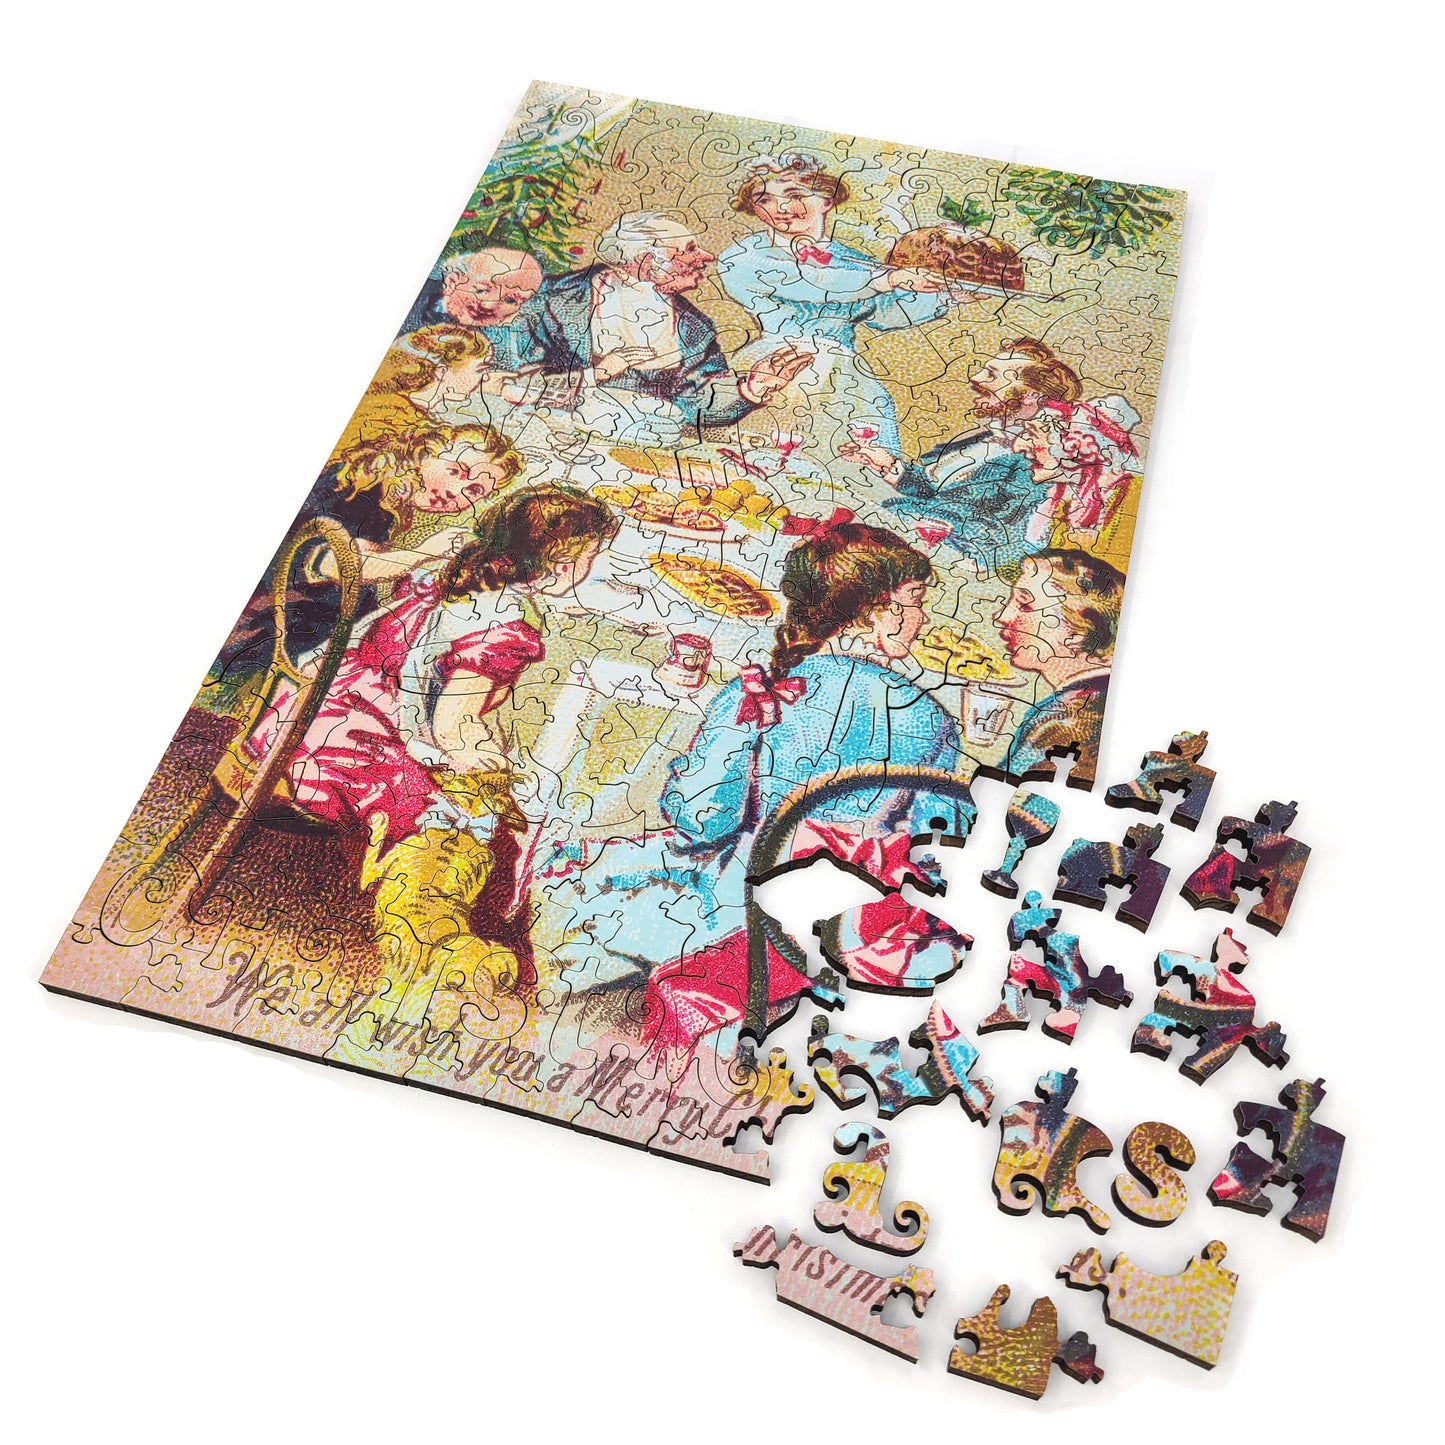 Large Format Wooden Jigsaw Puzzle with Uniquely Shaped Pieces for Seniors and Adults - 205 Pieces - We all wish you a merry Christmas